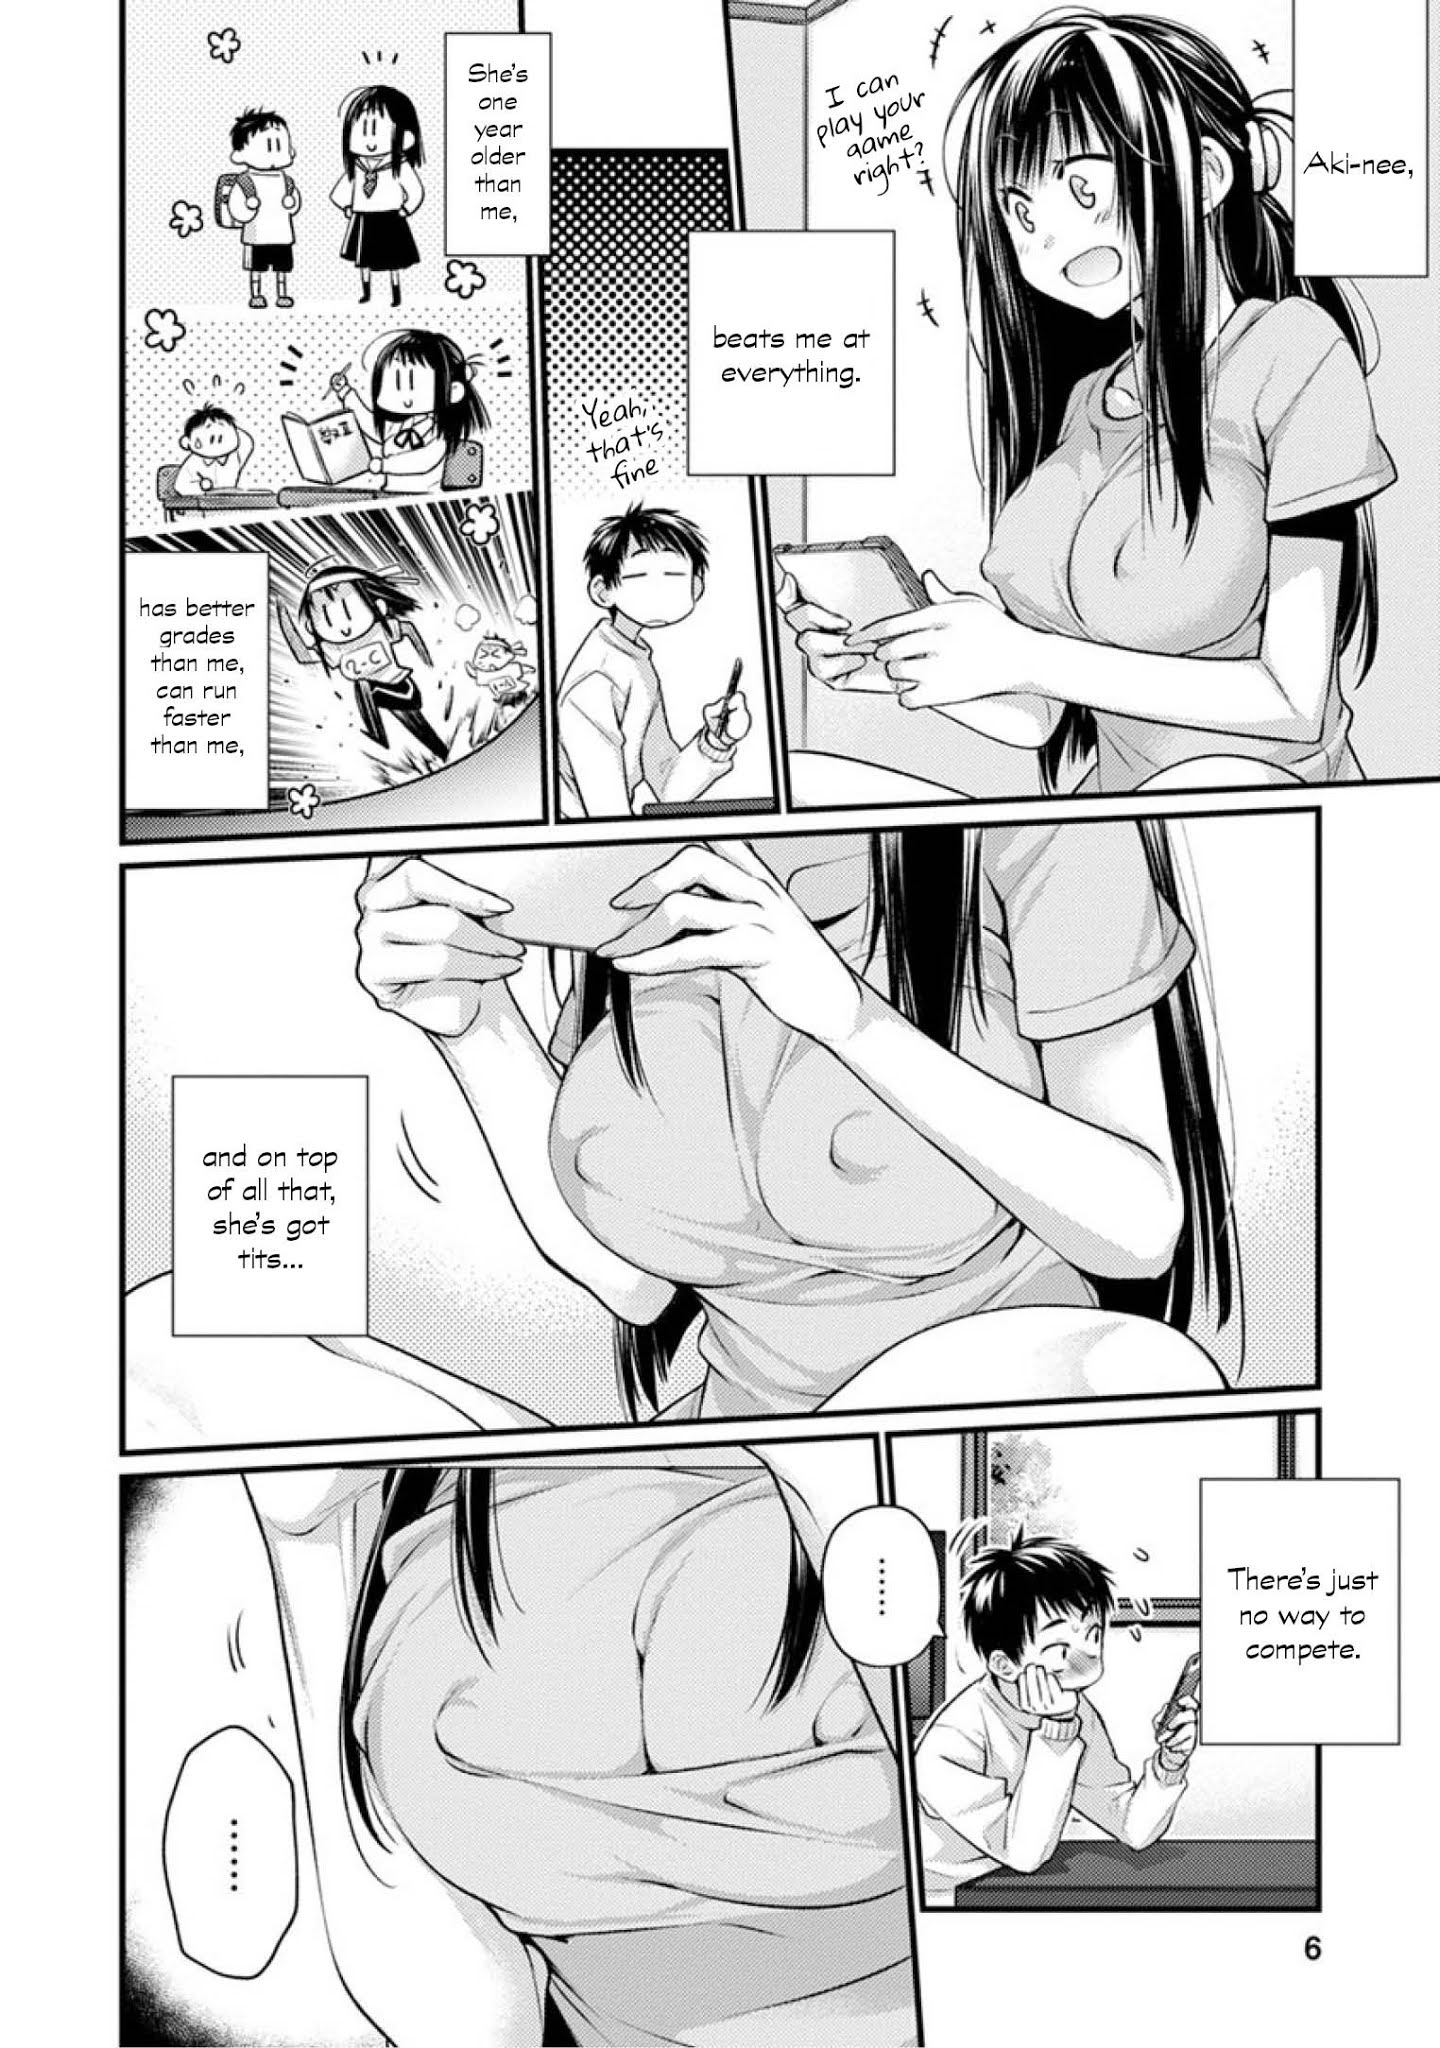 Show Me Your Boobies And Look Embarrassed! - Page 2